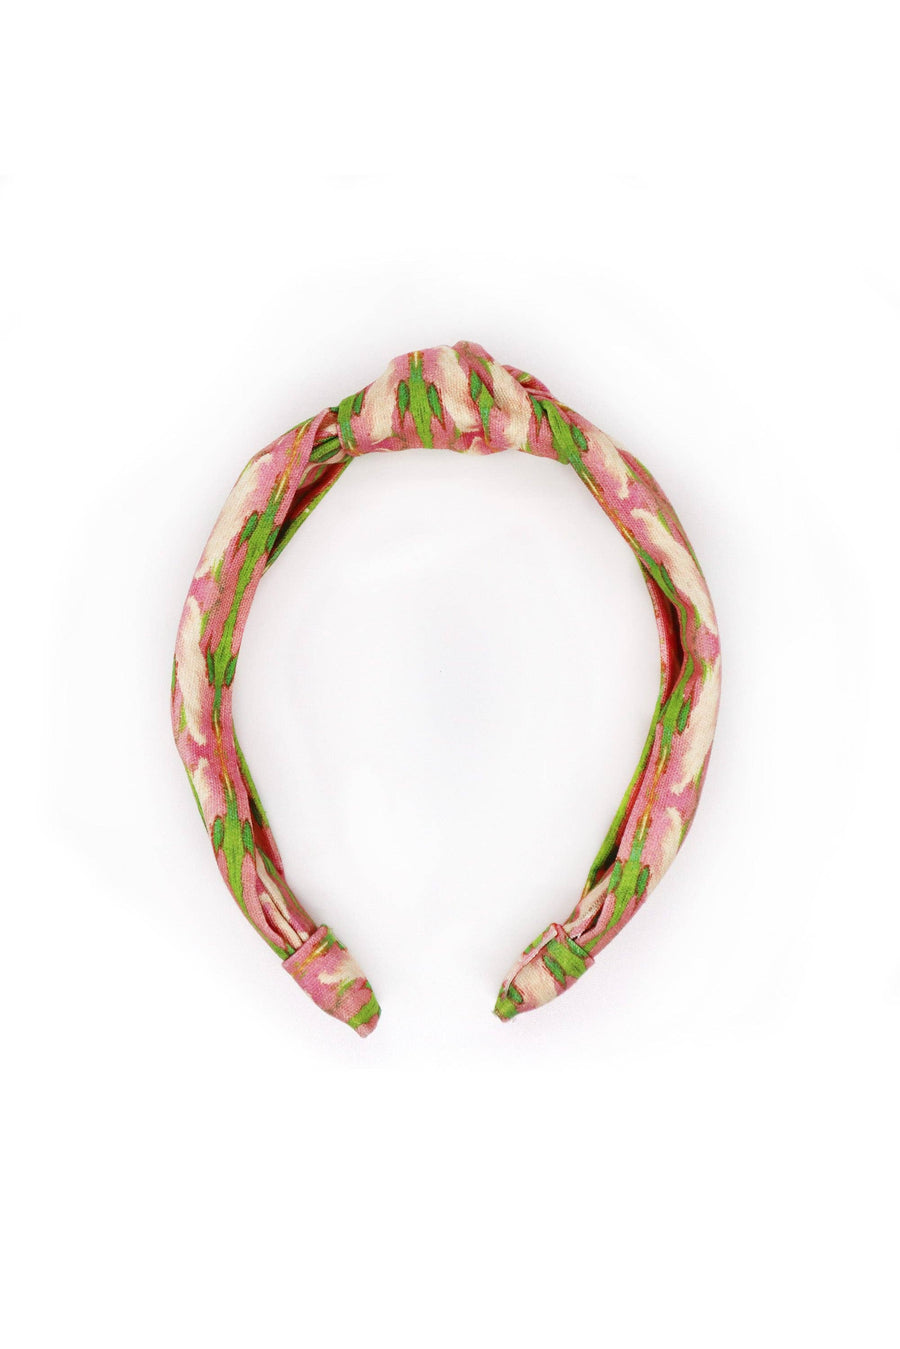 Knotted Headband in Cabana Pink by Brooks Avenue